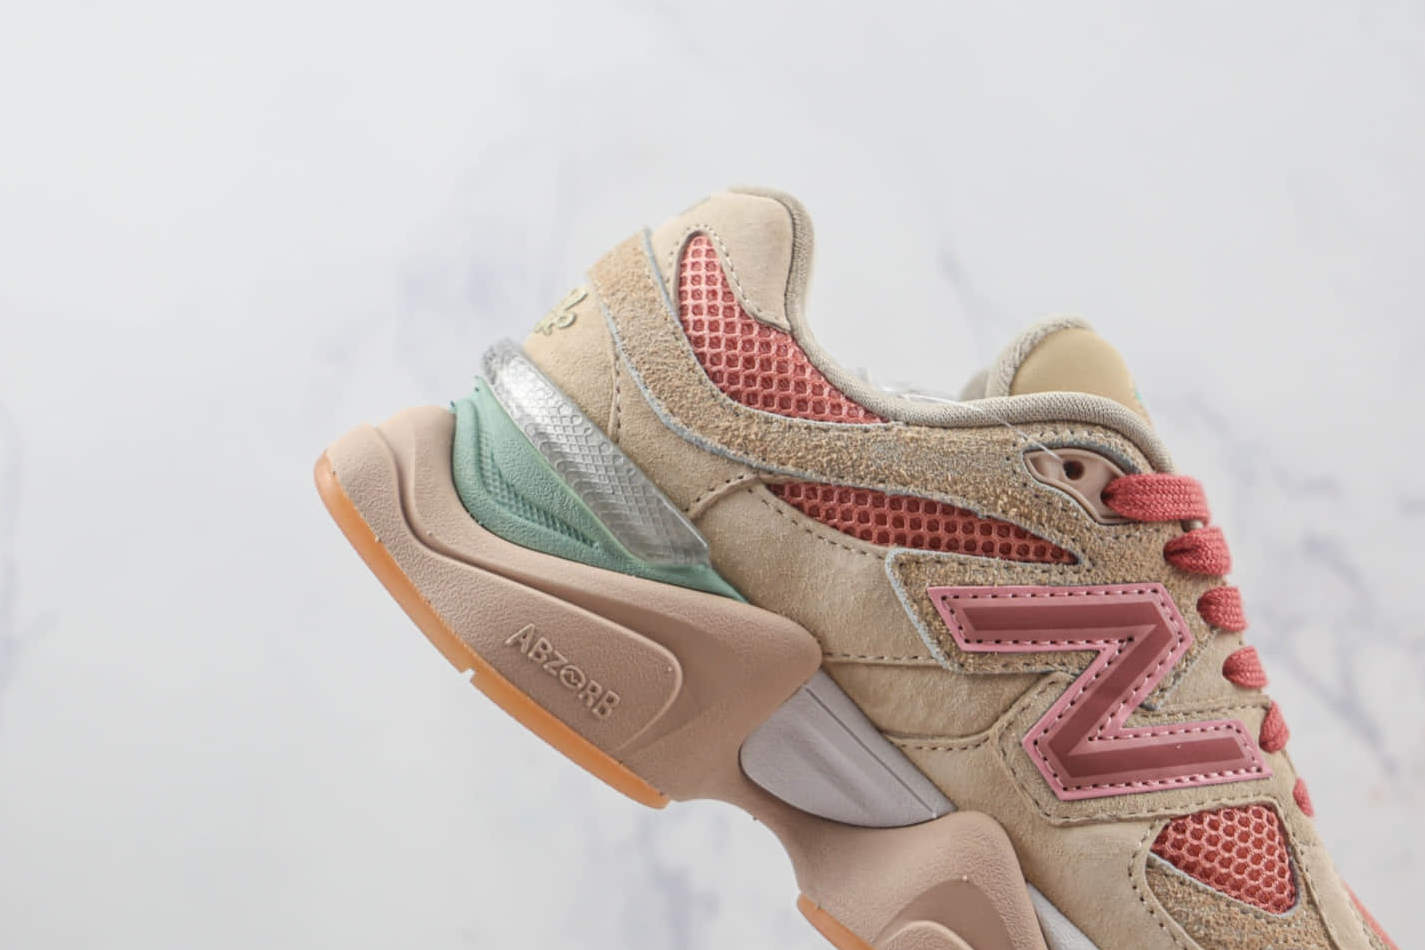 New Balance 9060 x Joe Freshgoods Penny Cookie Pink U9060JF1 - Limited Edition Collaboration Sneakers